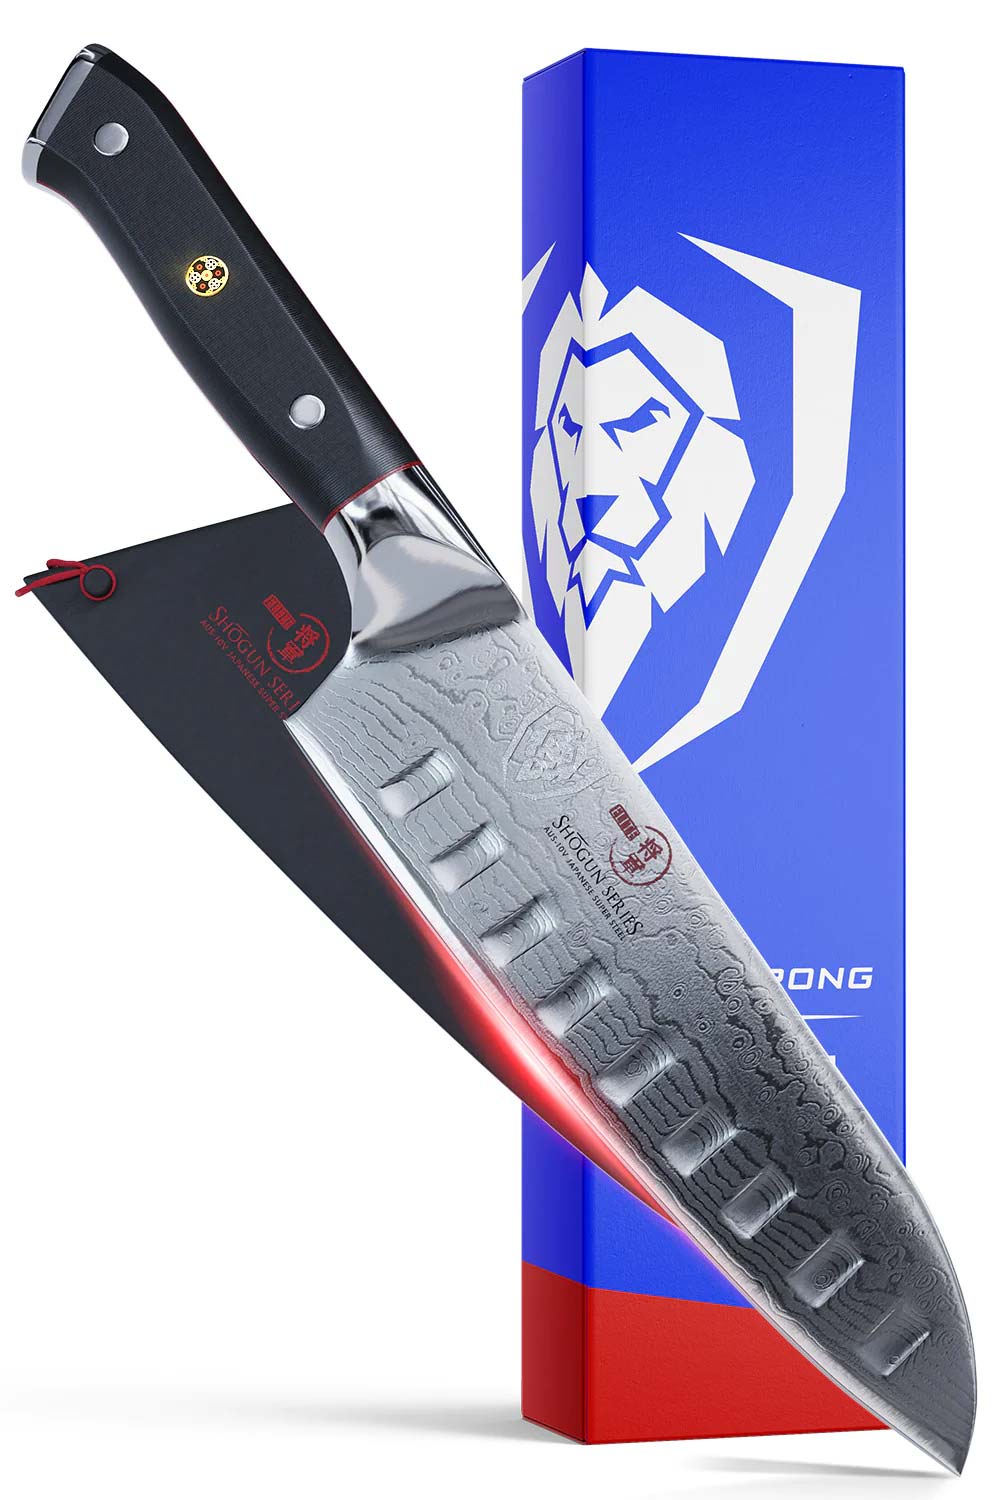 Dalstrong shogun series 7 inch santoku knife with black handle in front of it's premium packaging.